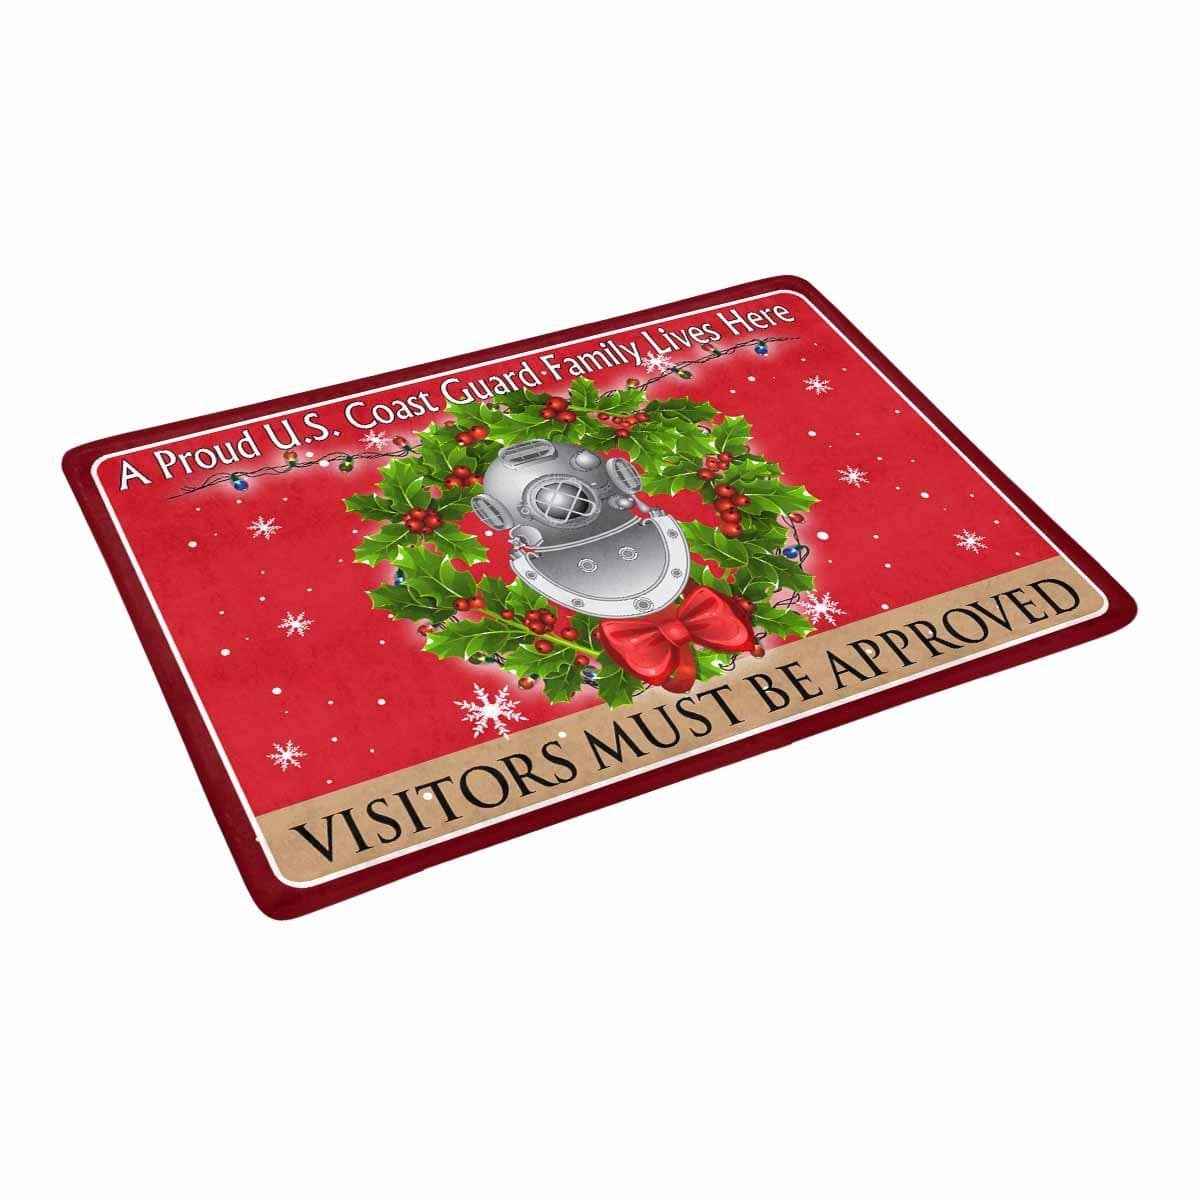 US Coast Guard Diver ND Logo - Visitors must be approved Christmas Doormat-Doormat-USCG-Rate-Veterans Nation